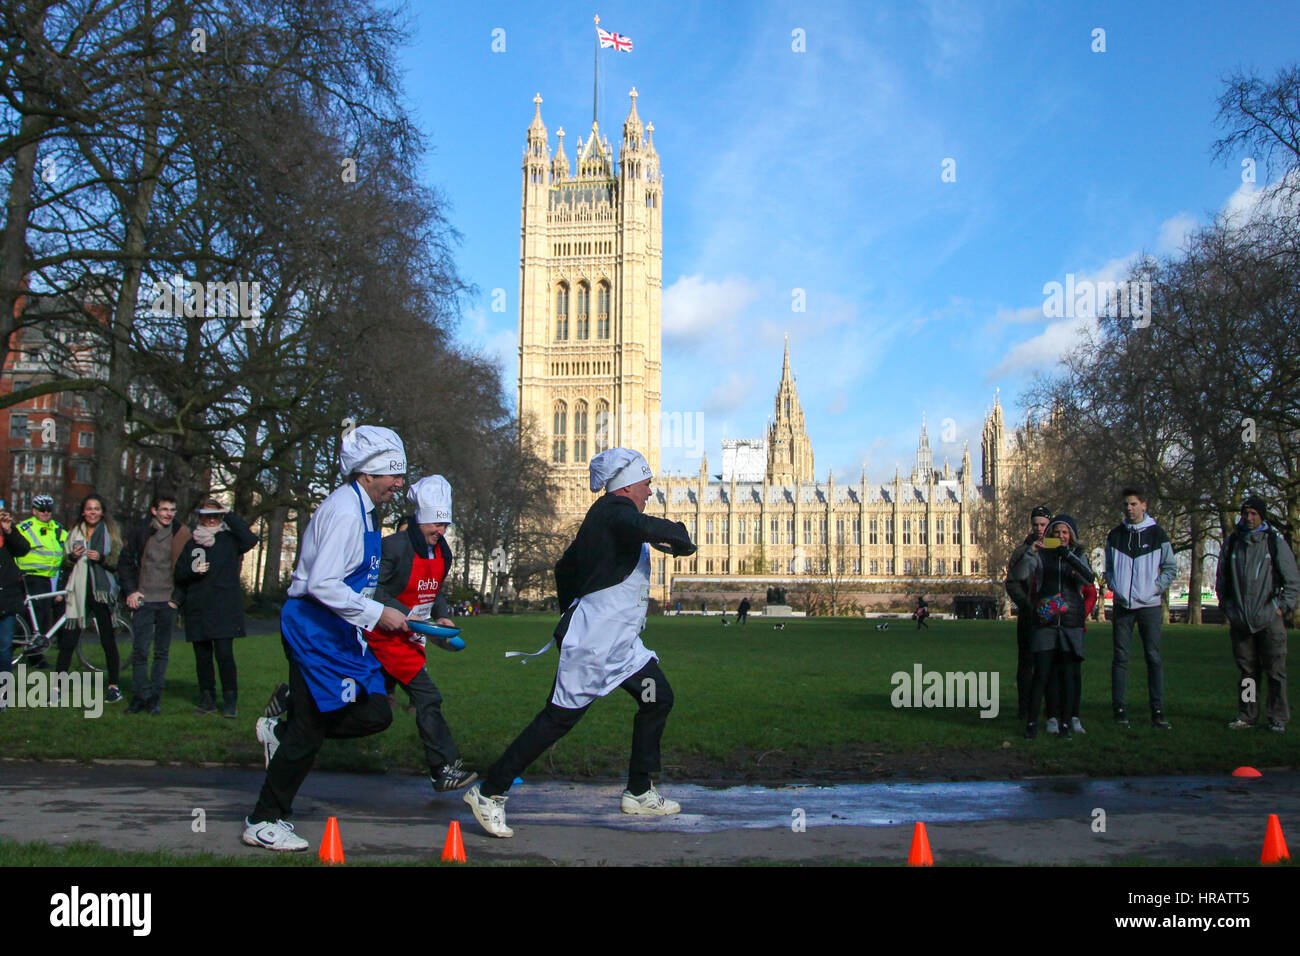 Victoria Tower Gardens, London, UK. 28th Feb, 2017. Tim Loughton, MP for East Worthing and Shoreham, George Parker, Political Editor, Financial Times. Lords, MPs and members of media teams take part in pancake race - celebrating 20 years of flipping for Rehab charity and its work with disabled people. Credit: Dinendra Haria/Alamy Live News Stock Photo